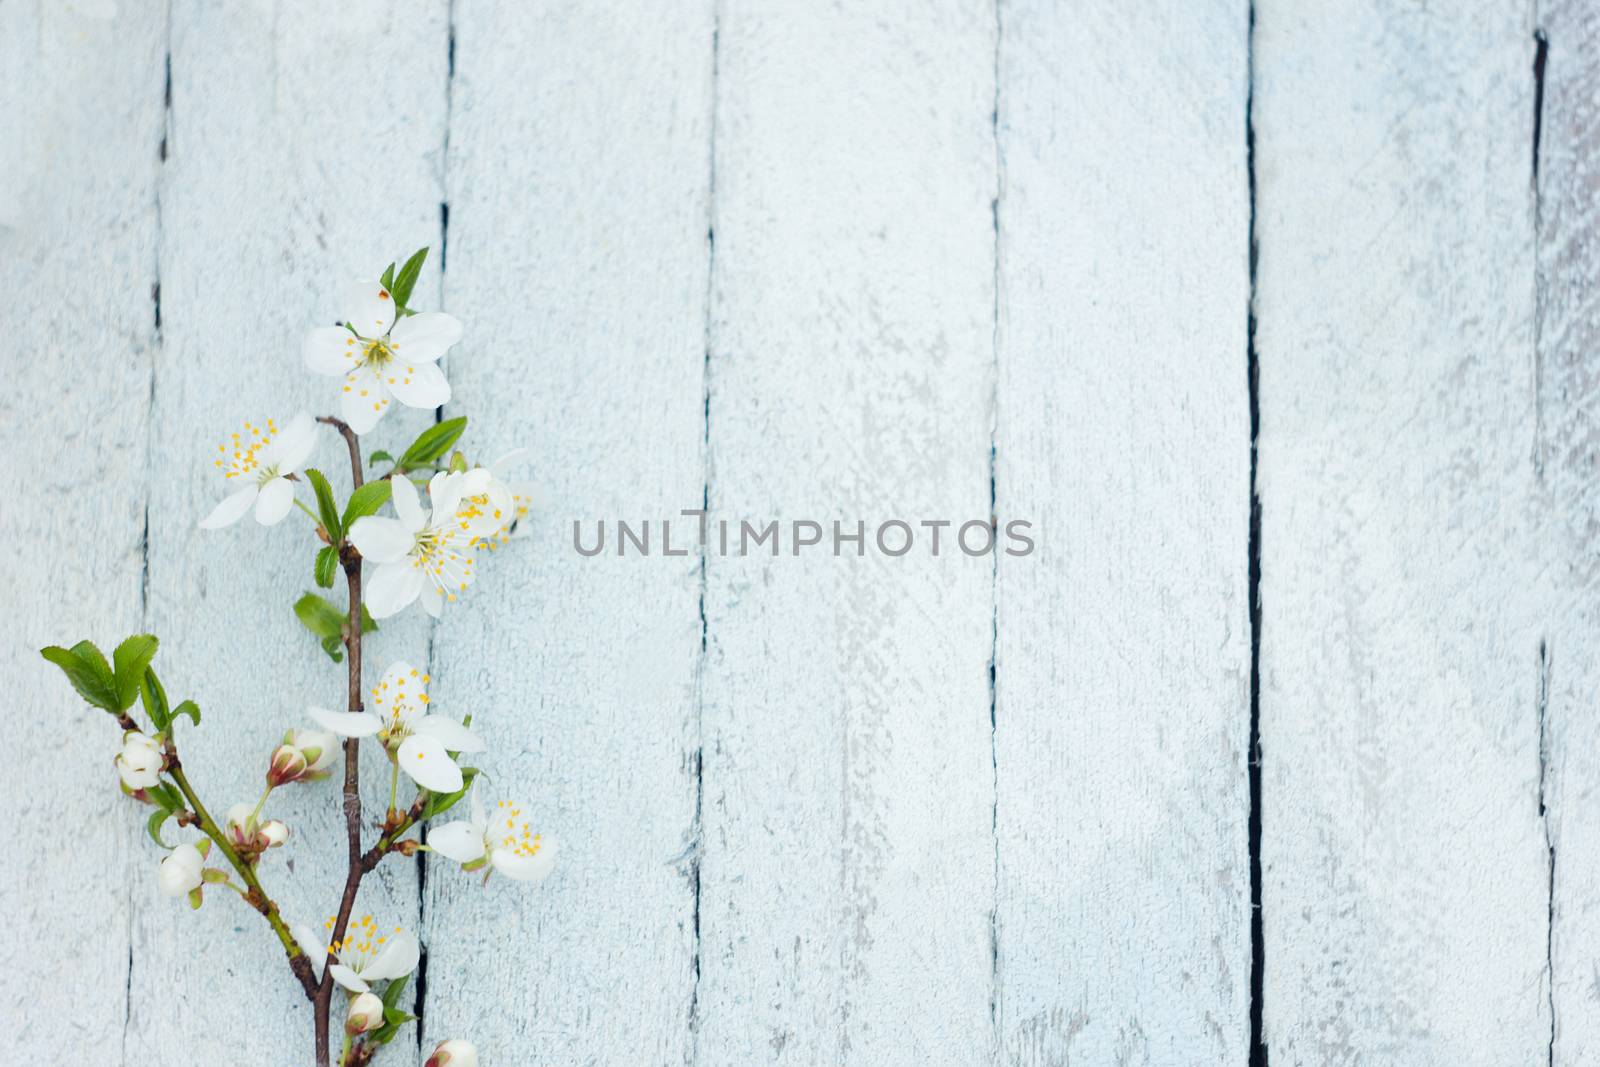 twig of a blossoming tree on a white wooden background, spring background